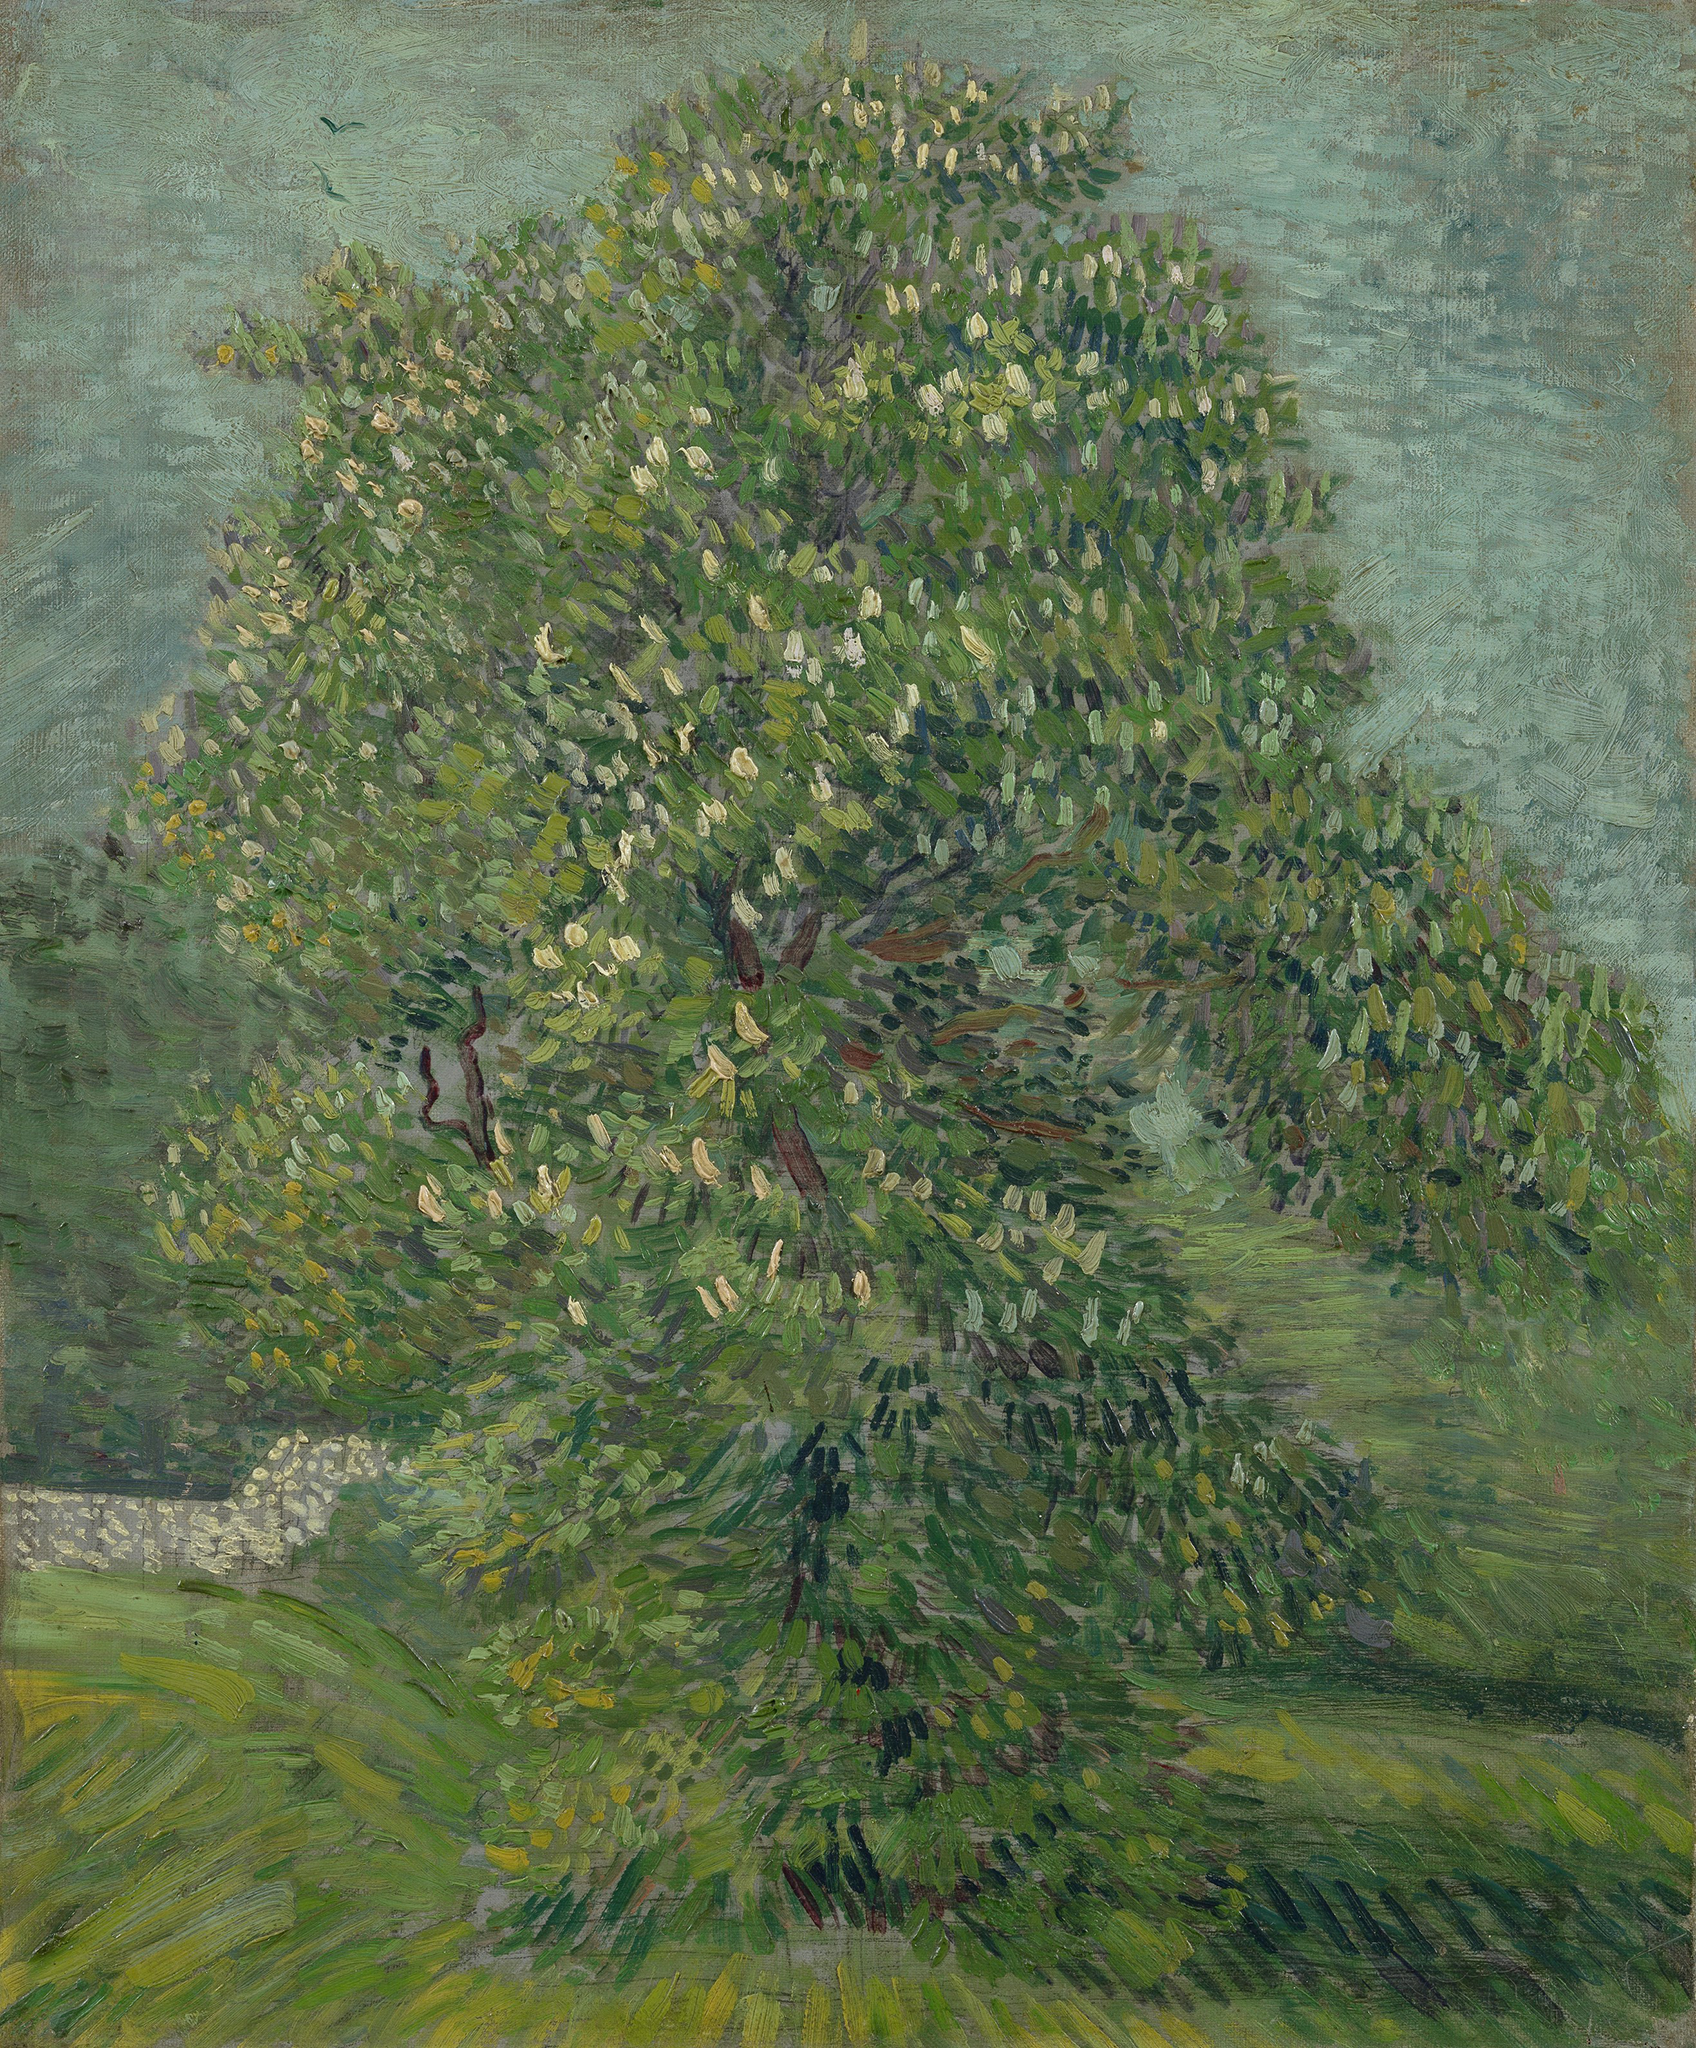 A painting of a large tree with brown branches and multiple shades of green for its leaves. The trees stand on a grass field with a gray stone wall sitting behind it.